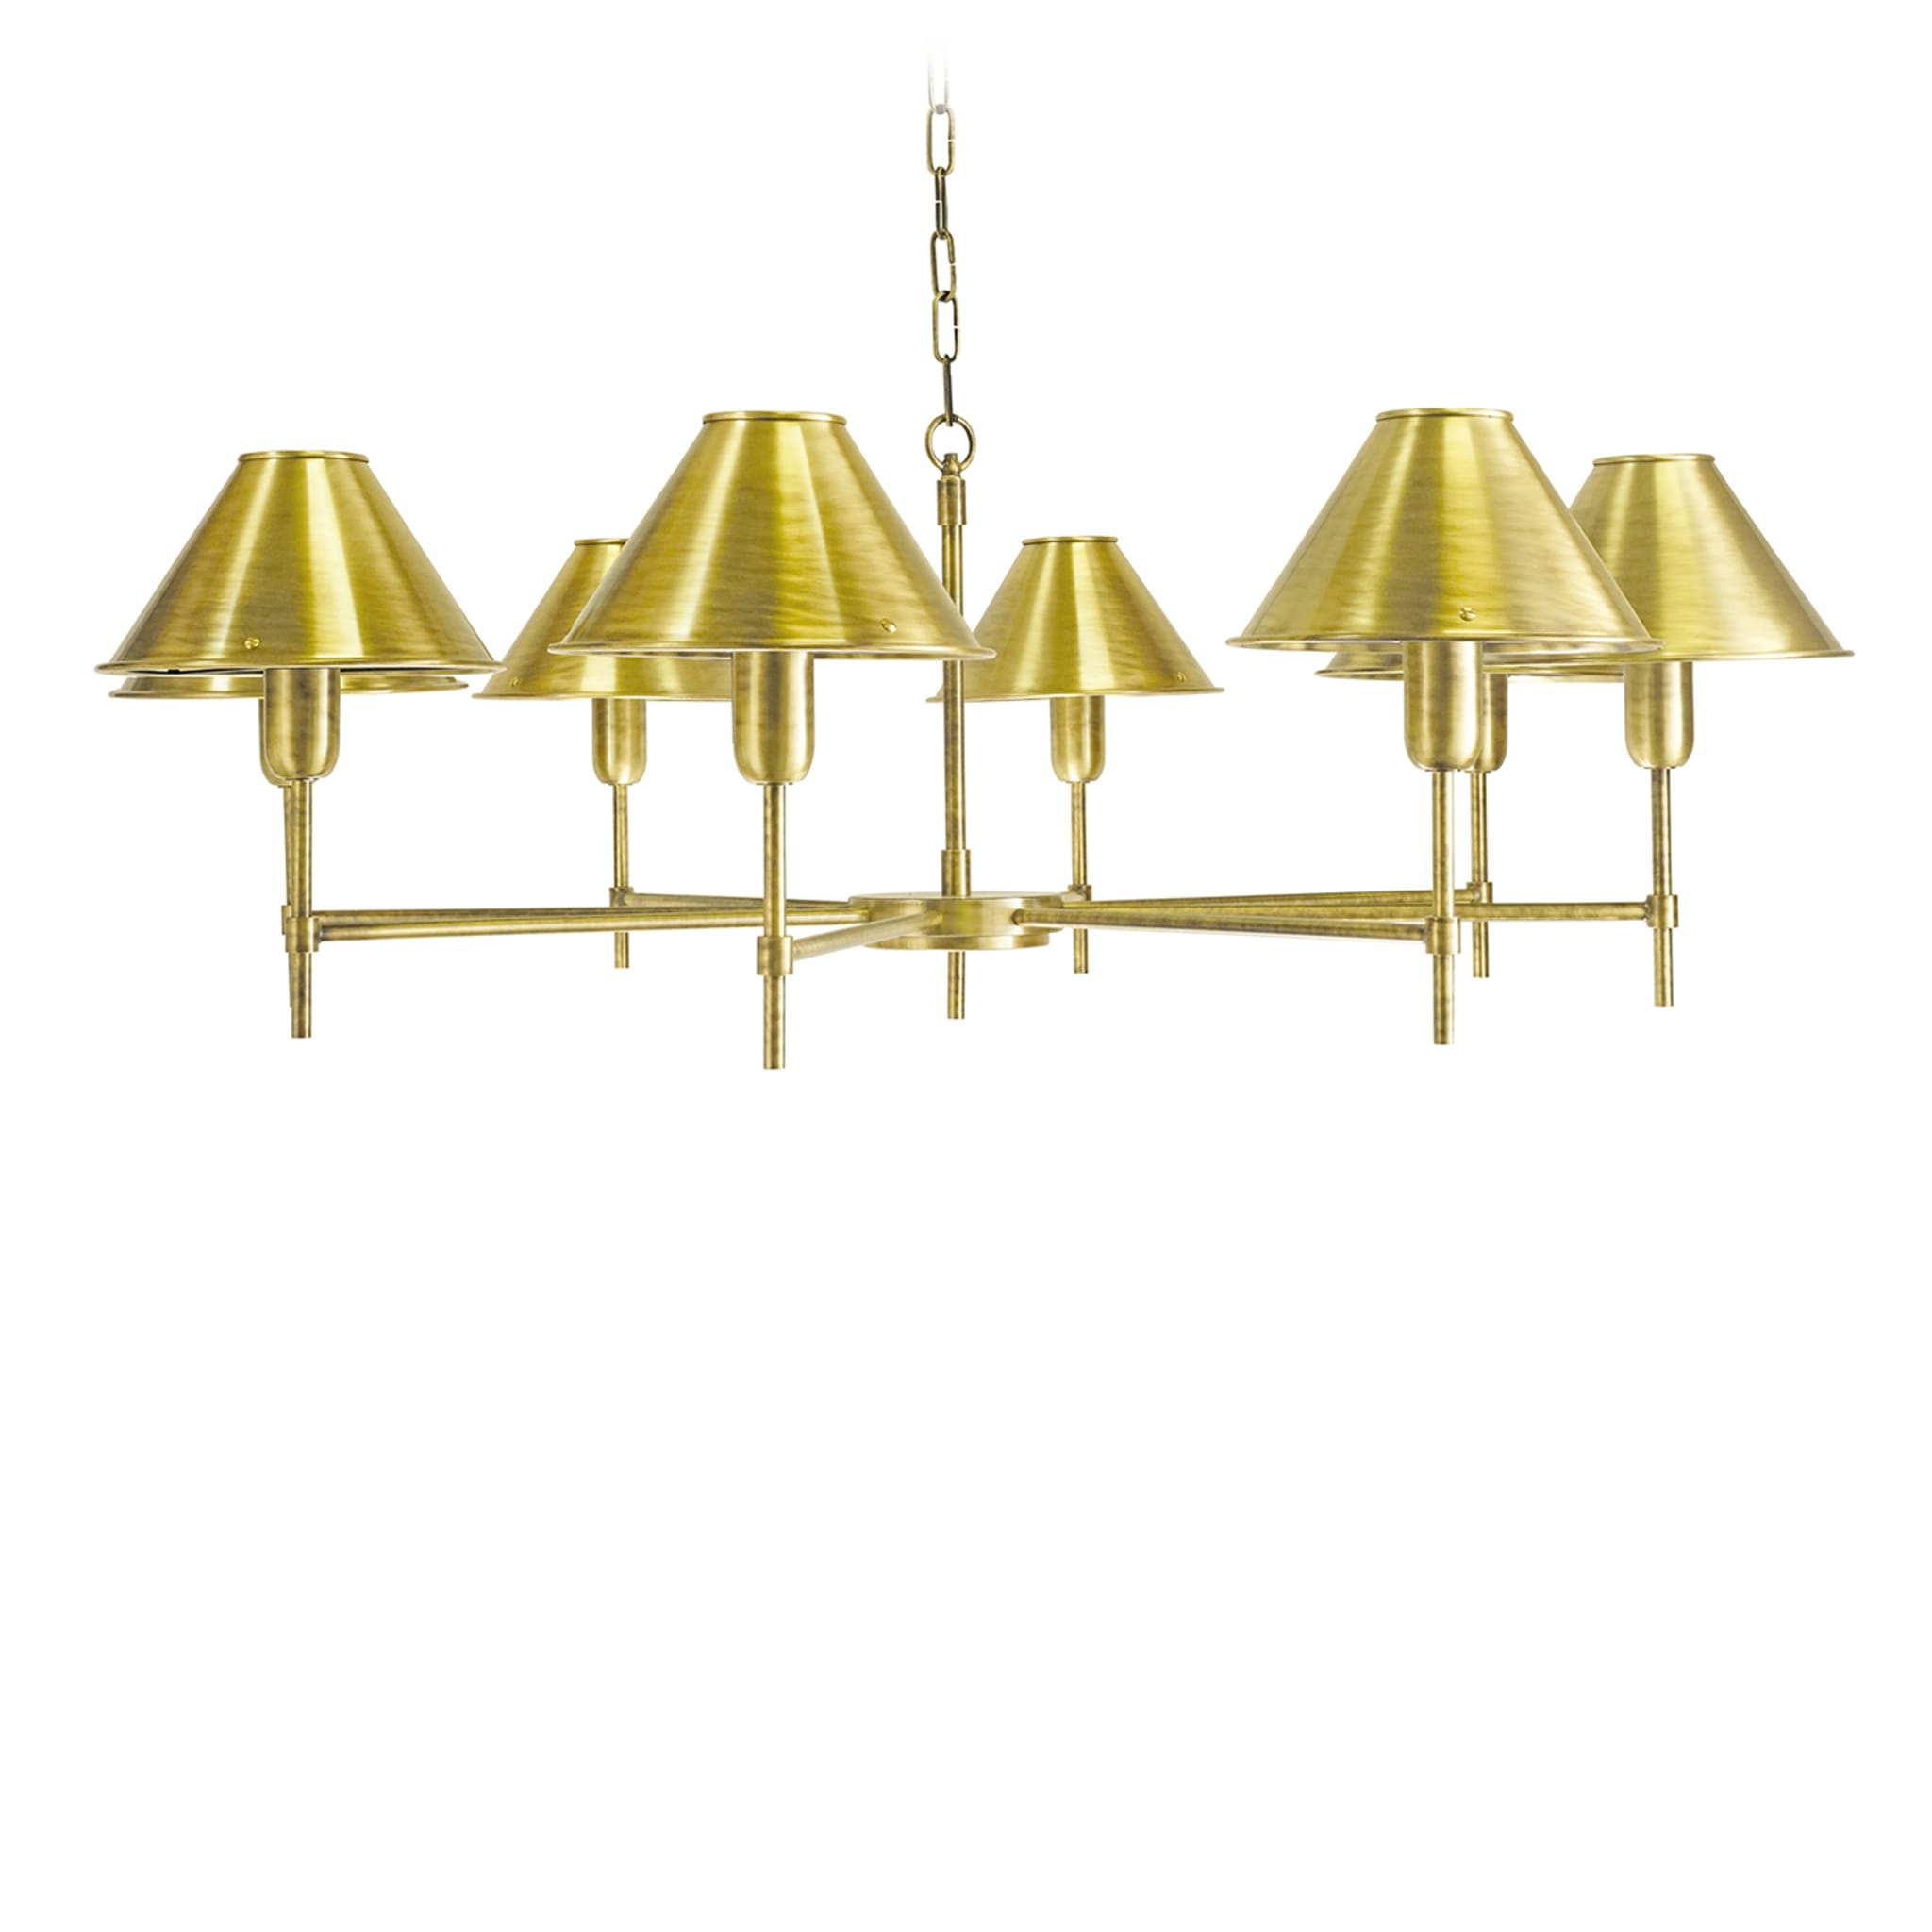 Alicya M288 Chandelier by Stefano Tabarin - Main view